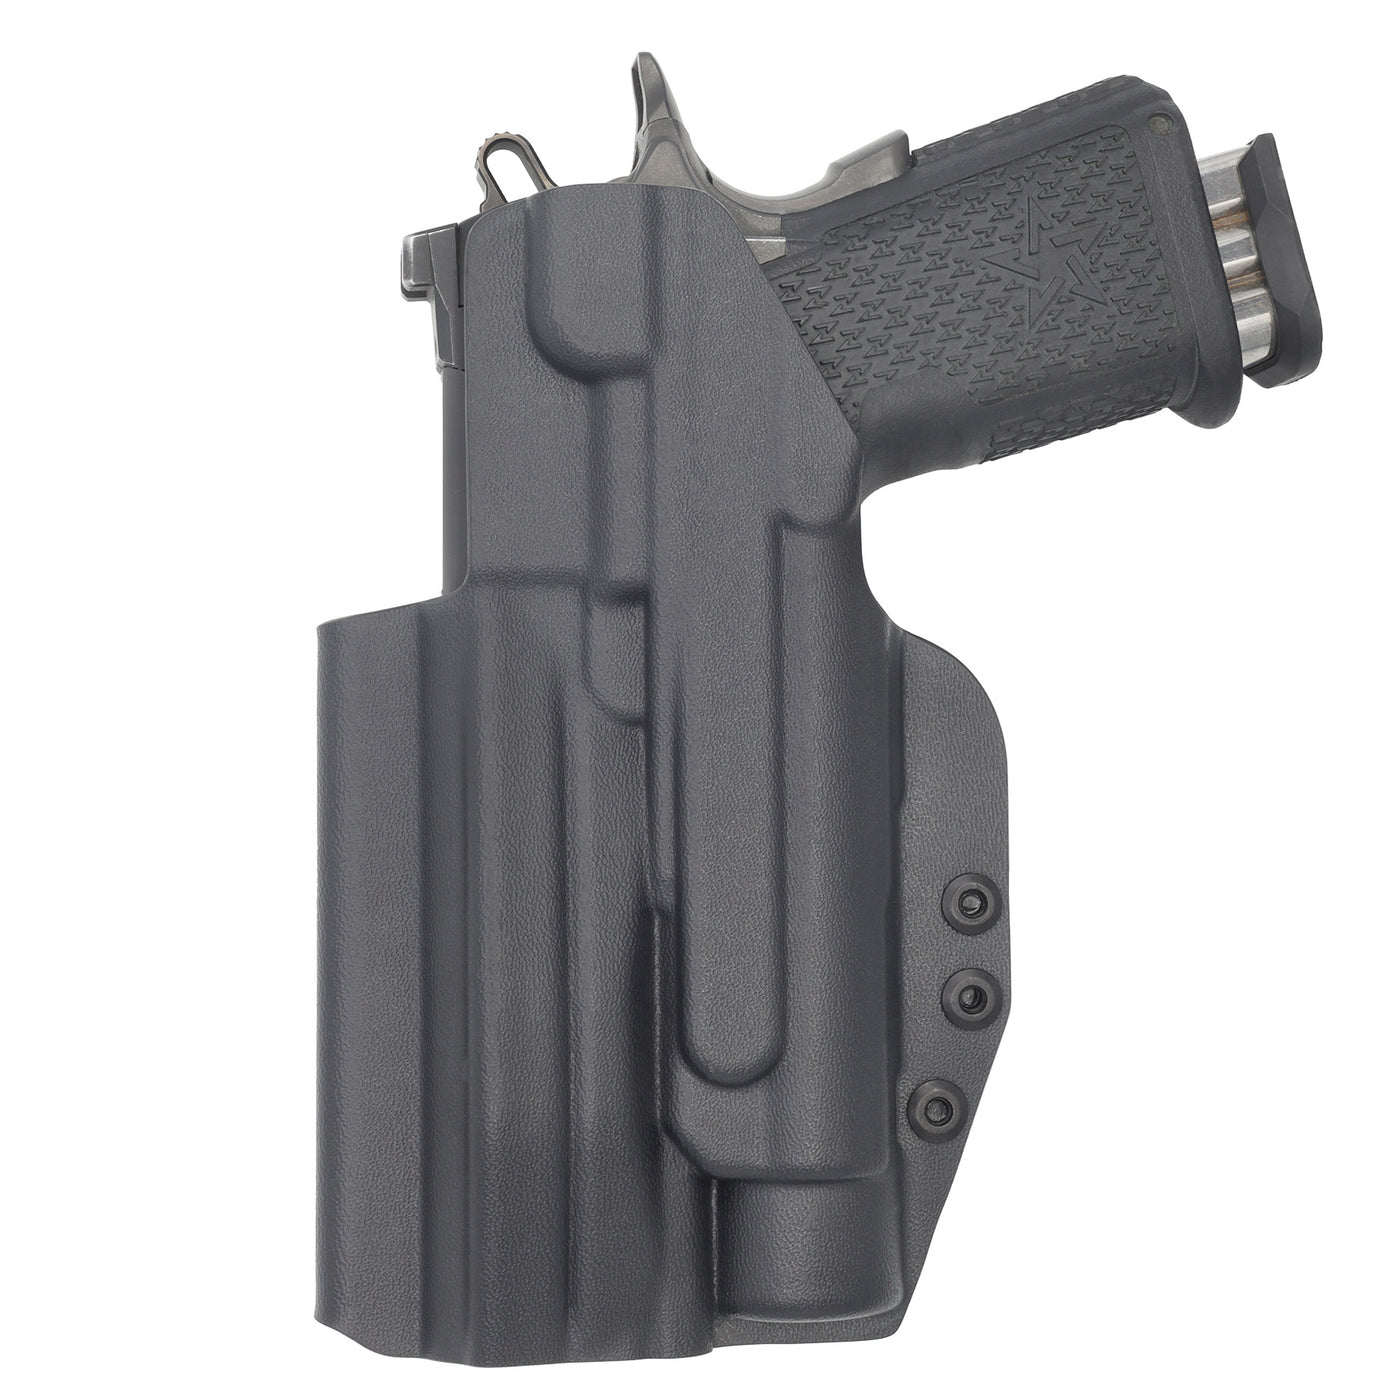 C&G holsters Quickship IWB tactical 1911/2011 Streamlight TLR-1 in holstered position back view